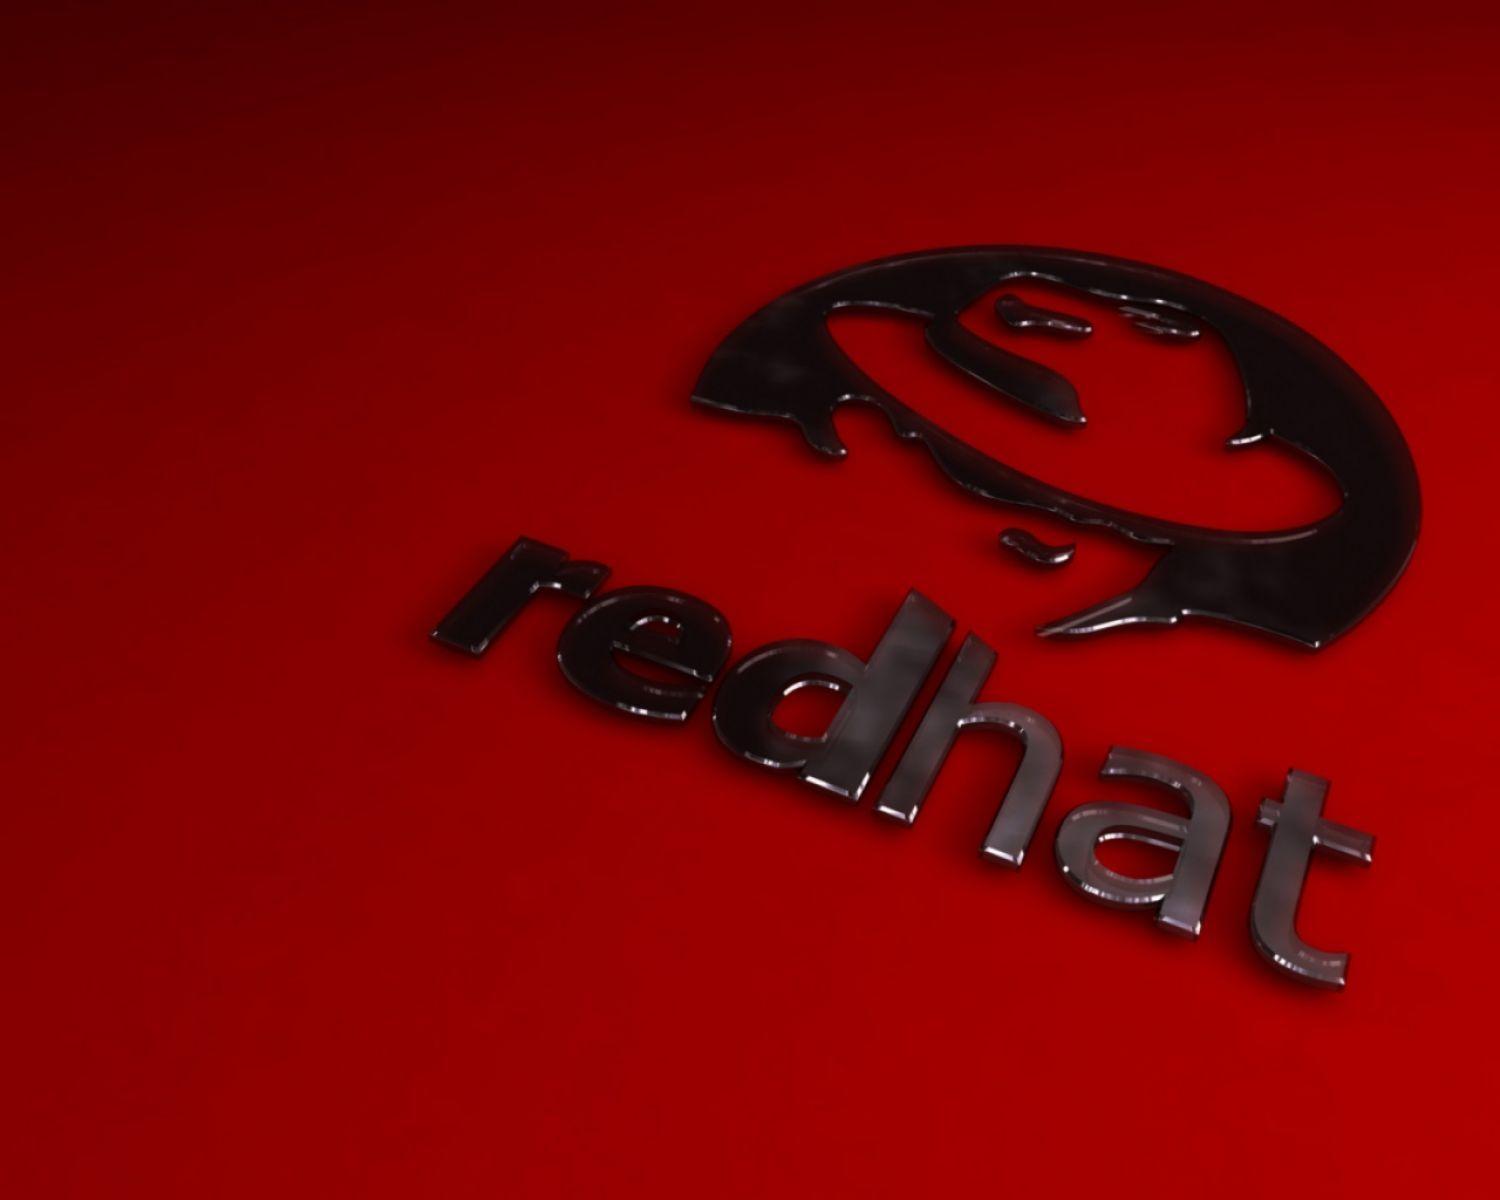 Redhat Logo With Glass Effect. HD Brands and Logos Wallpaper